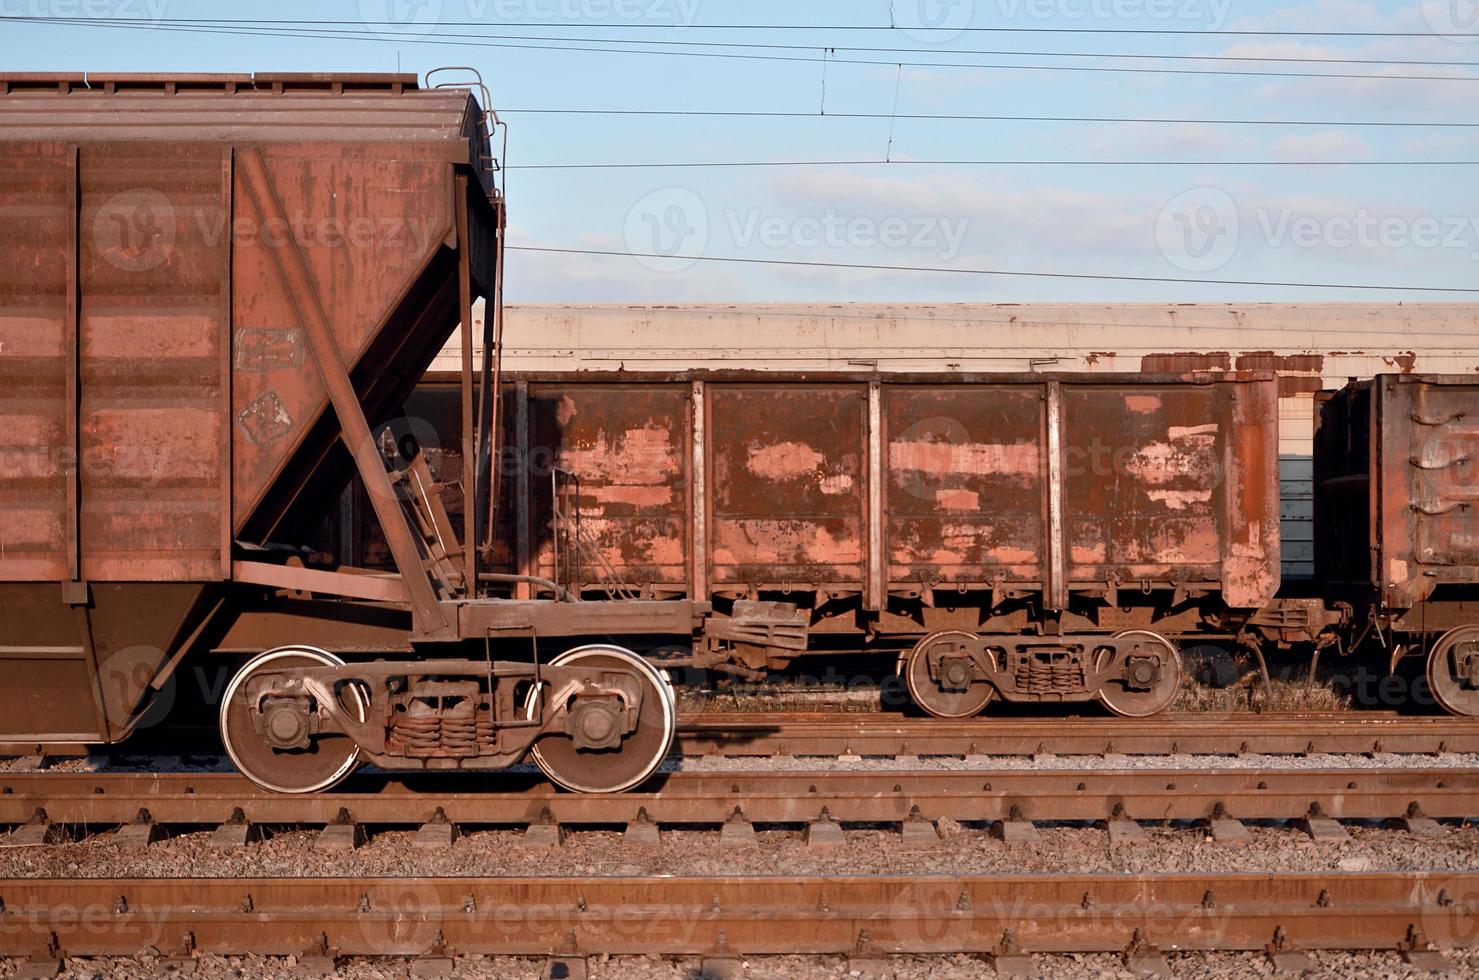 Parts of the freight railcar photo